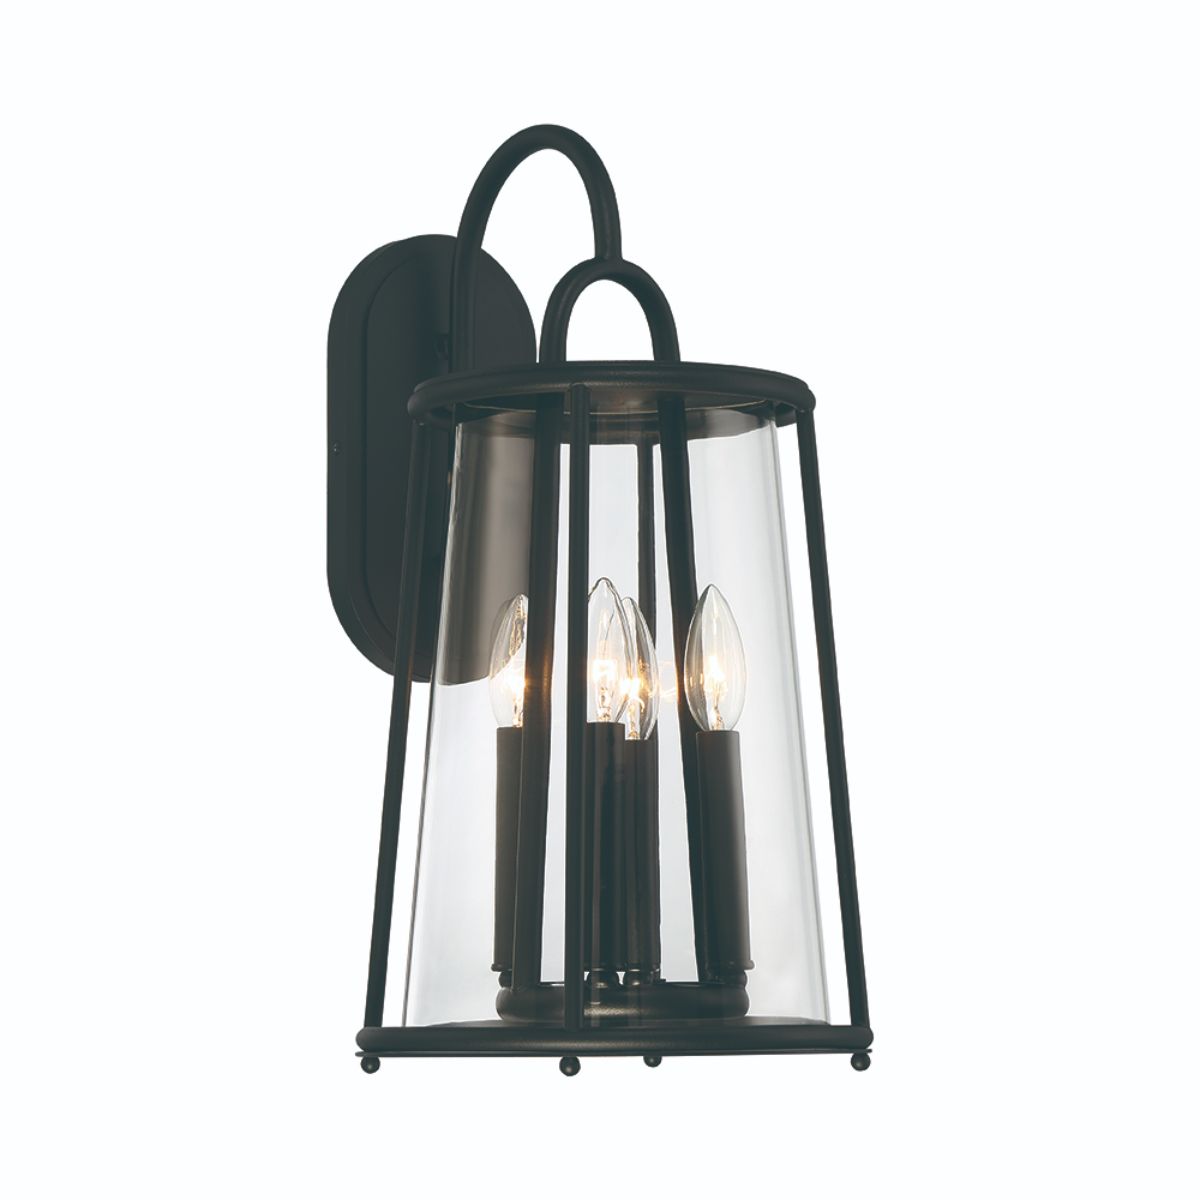 Daulle 19 In. 4 lights Outdoor Wall Sconce Satin Black Finish